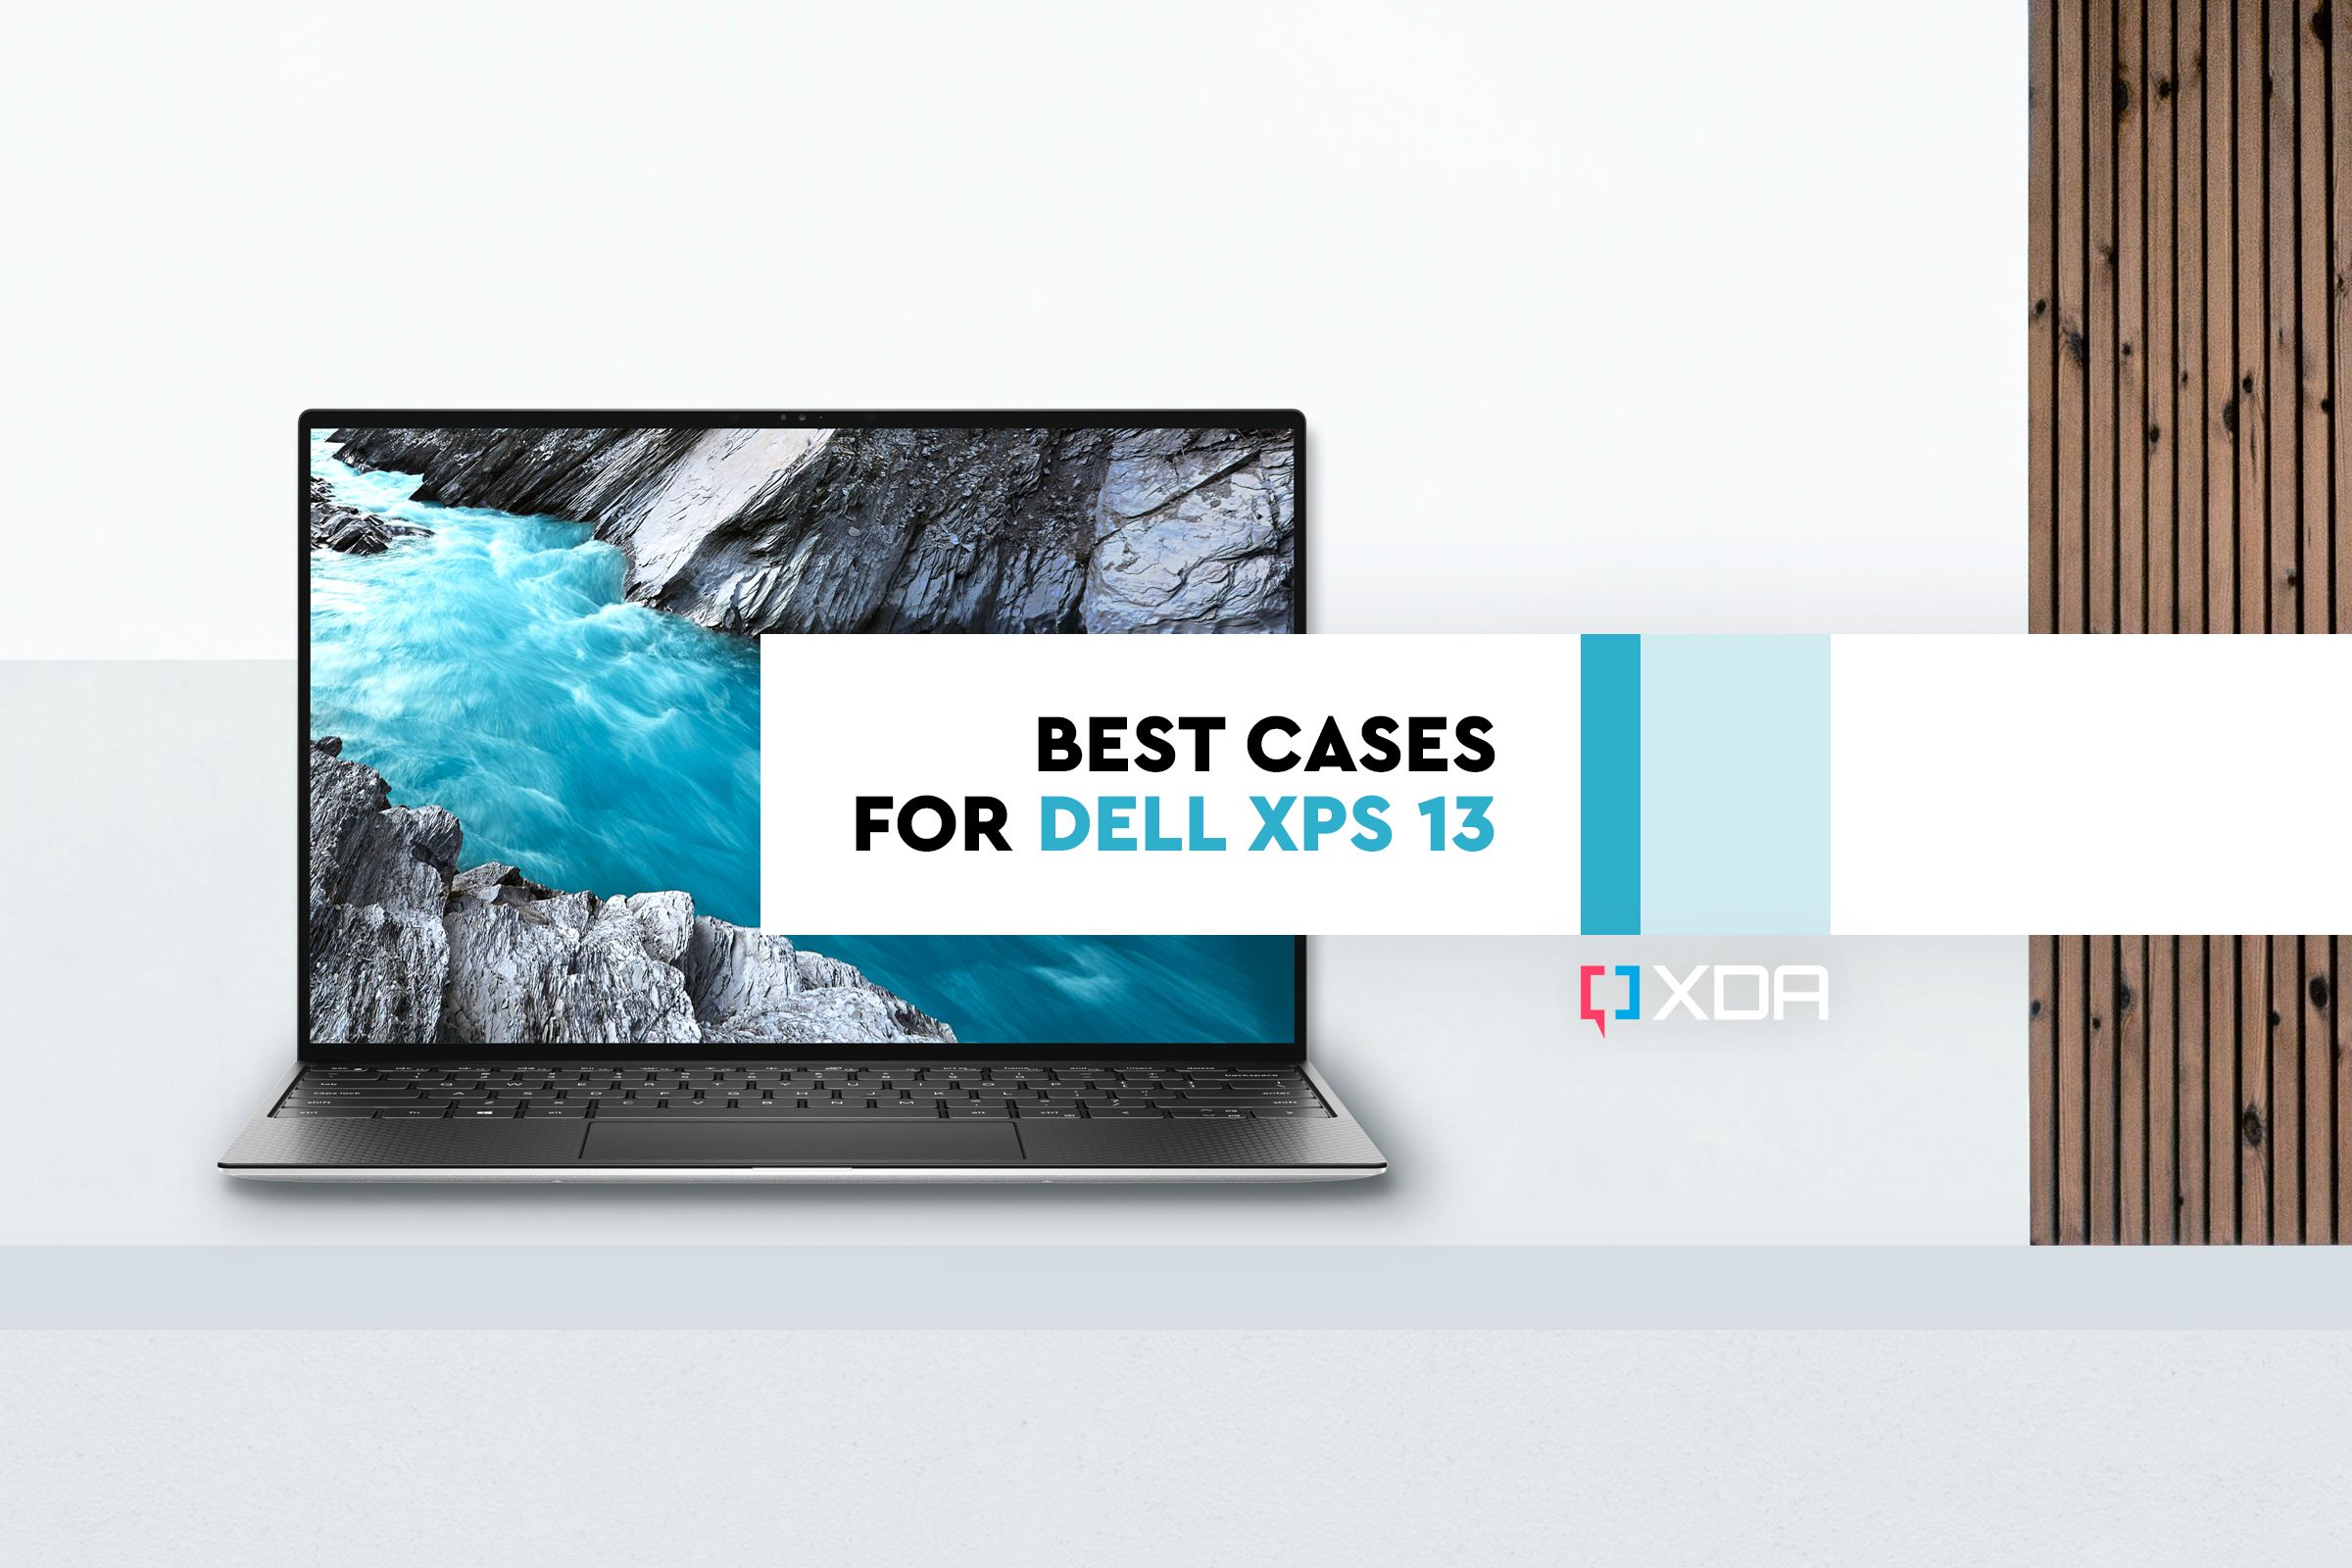 Best cases for Dell XPS 13